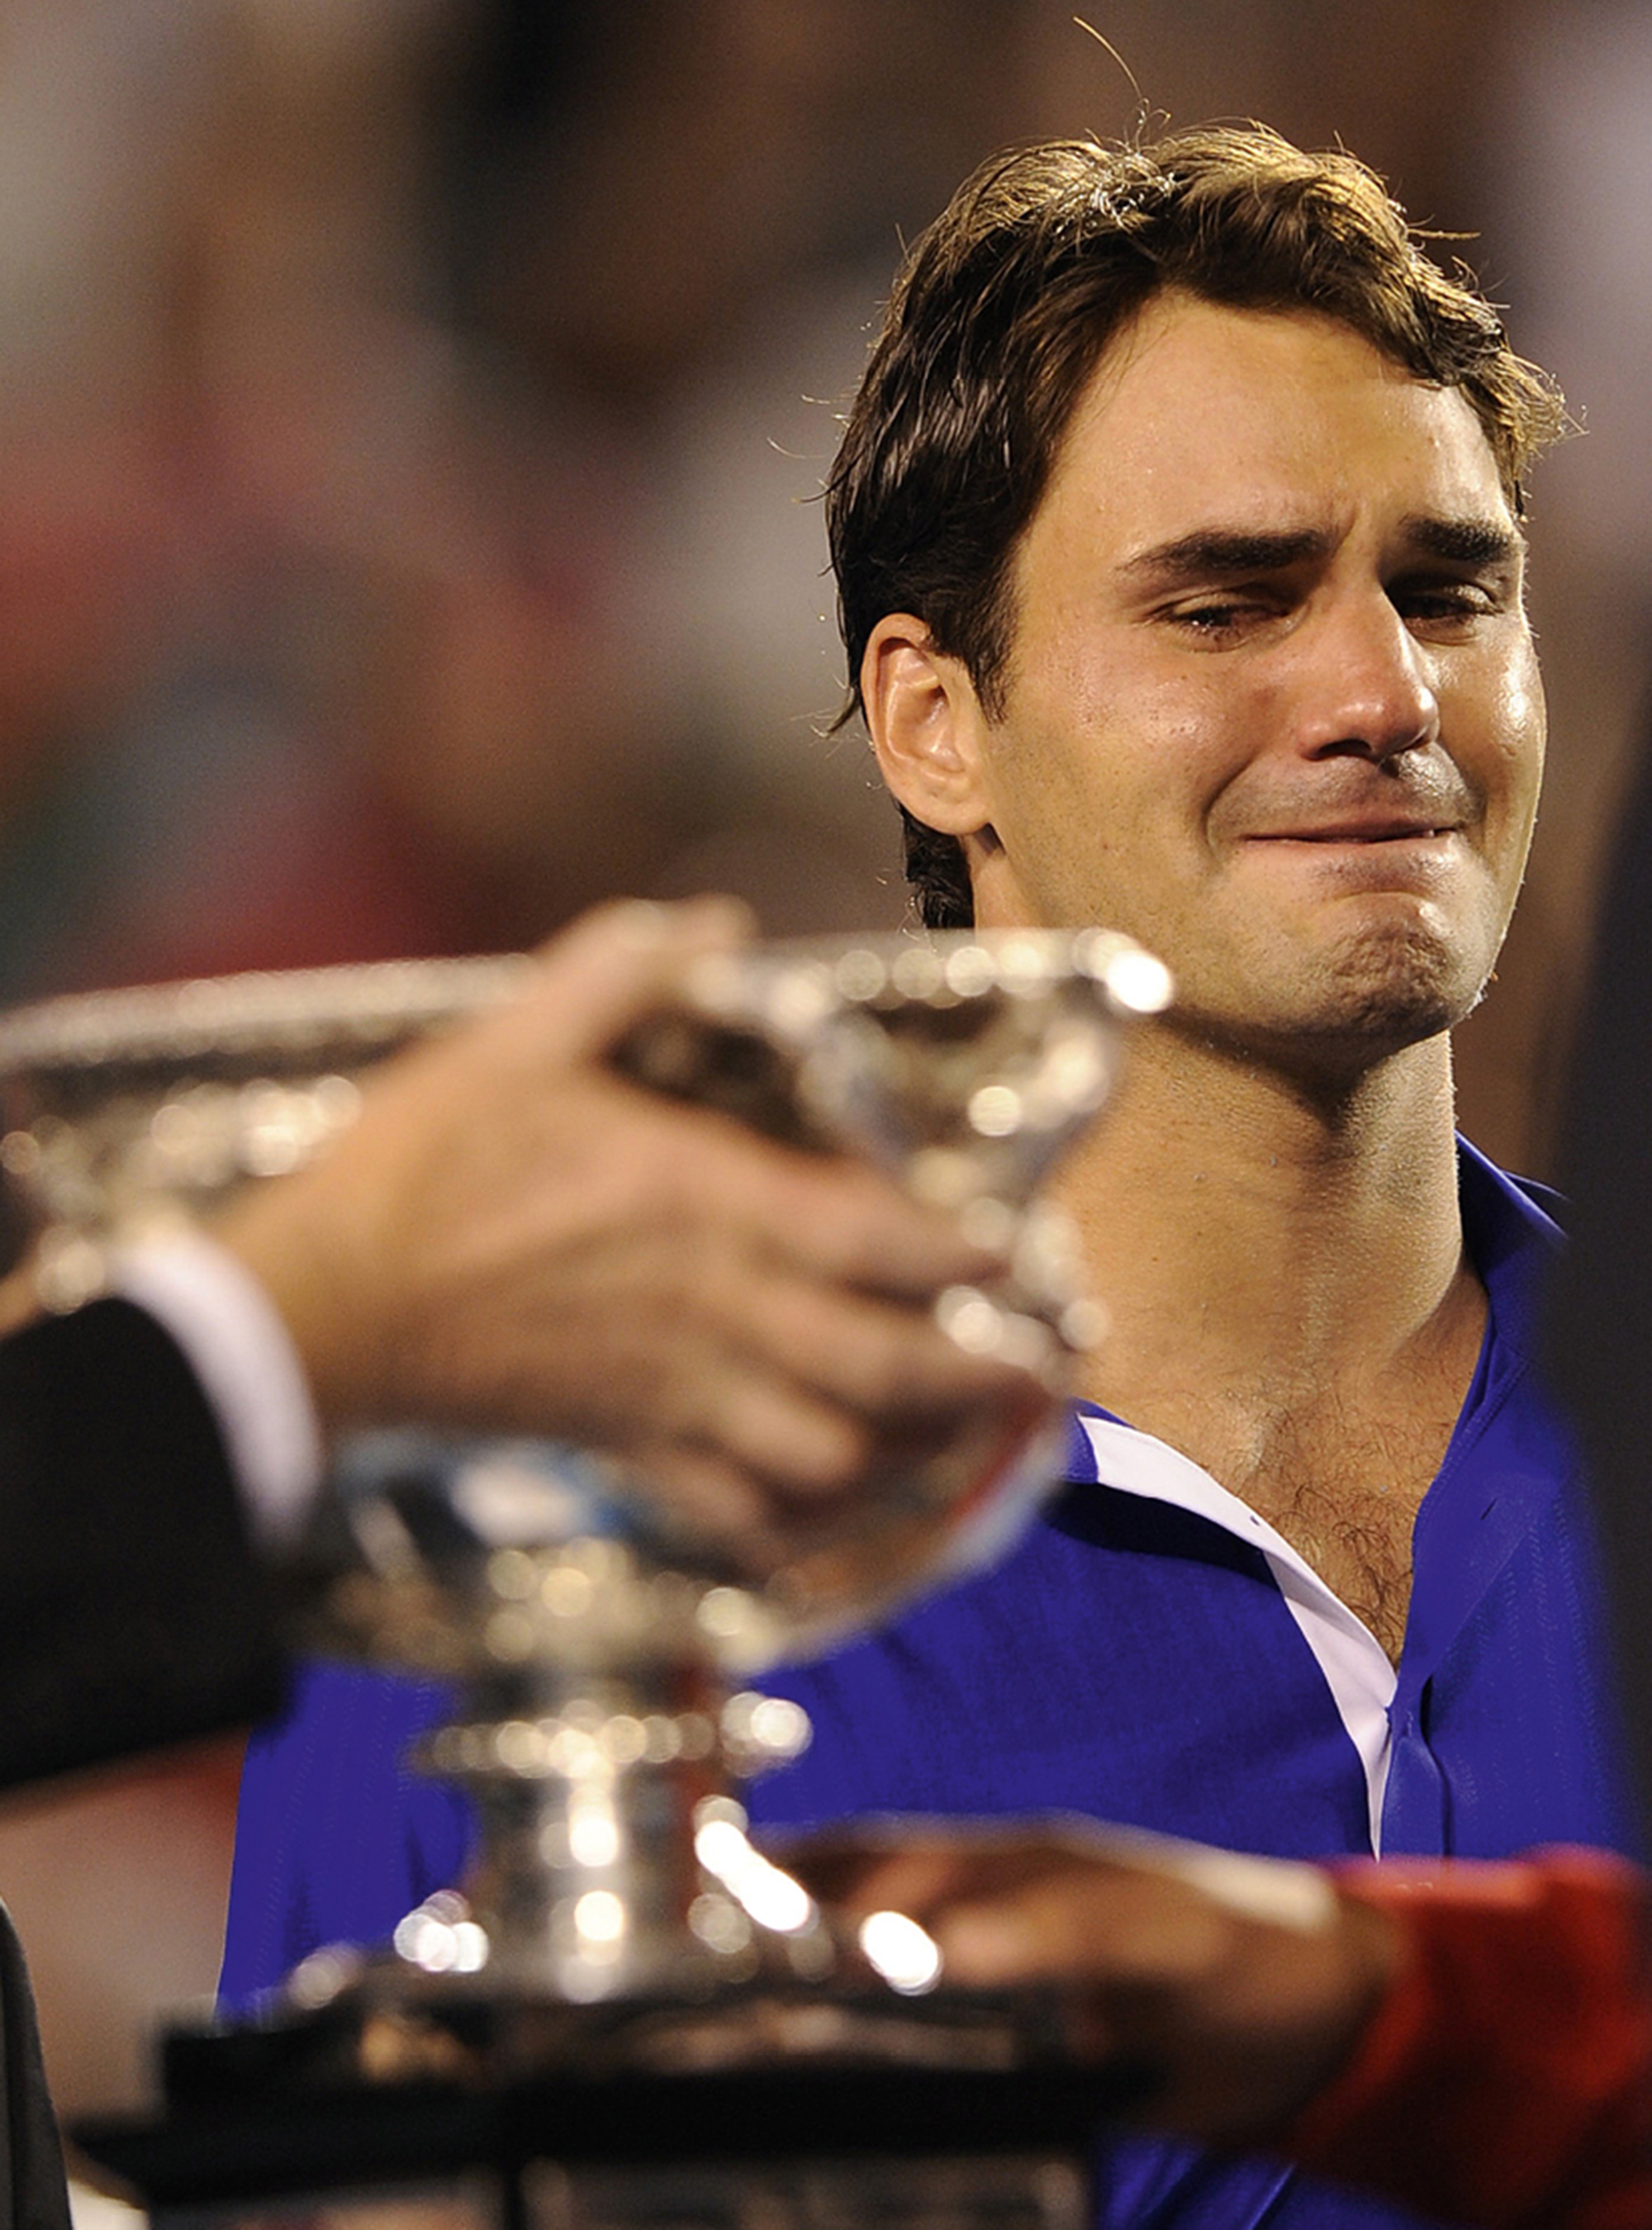 A photograph of Federer breaking down after losing the two thousand and nine Australian Open final to Nadal.